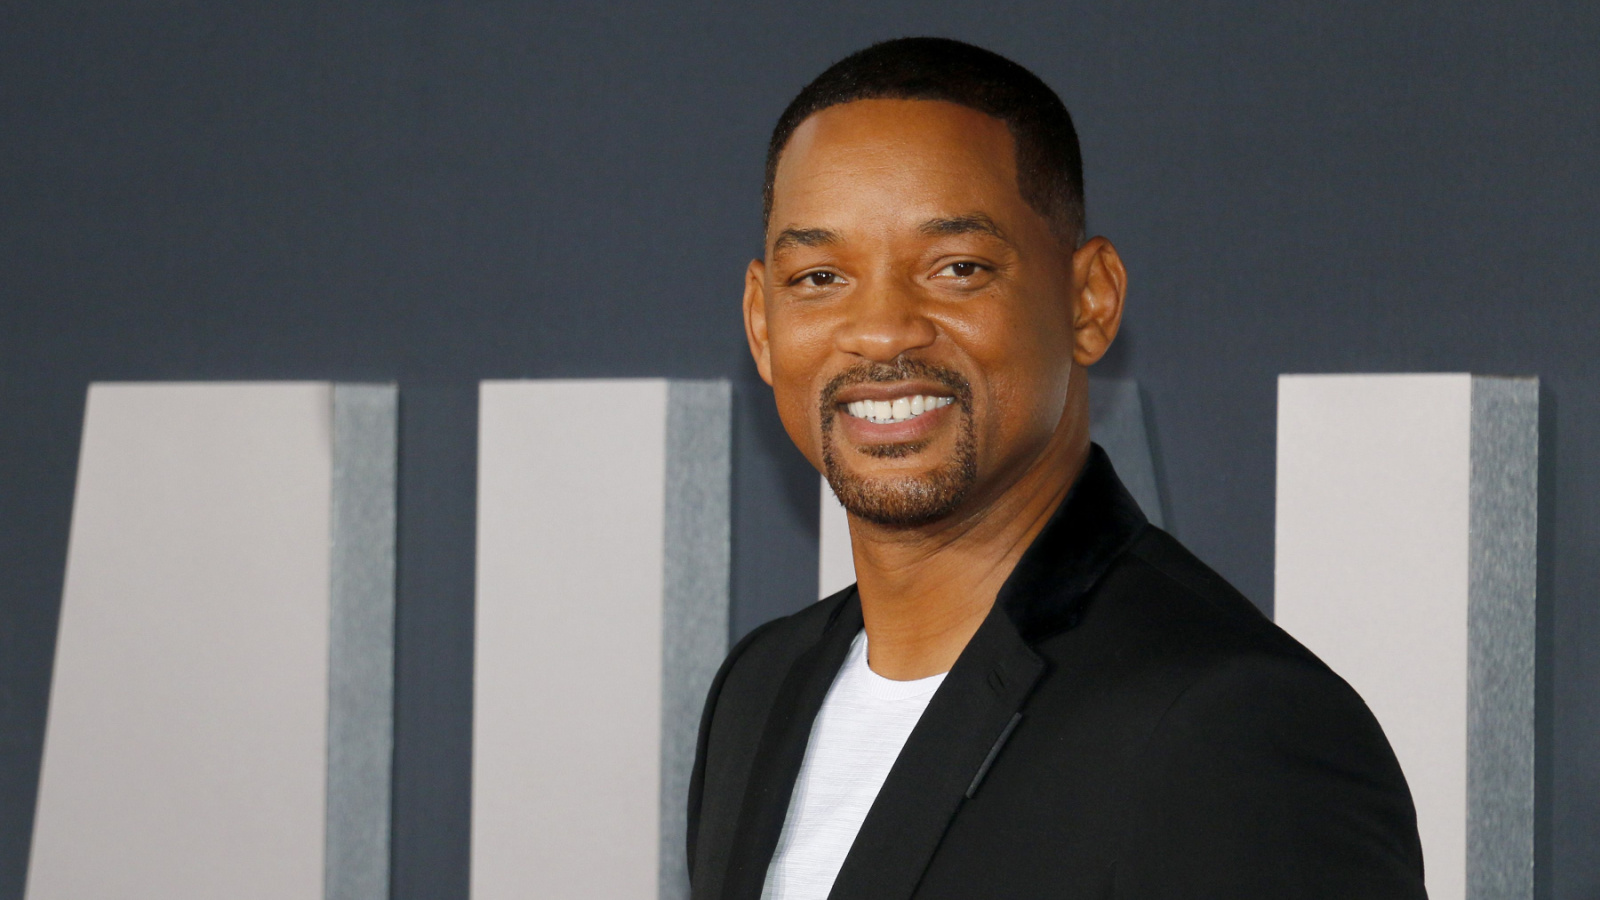 image credit: Tinseltown/Shutterstock <p><span>Will Smith’s journey from the streets of Philadelphia to the mansions of Bel-Air provided endless laughs and some touching moments. Known for its catchy theme song, the show tackled themes of race, class, and family with humor and heart. </span><i><span>The Fresh Prince of Bel-Air </span></i><span>remains a beloved classic, demonstrating Smith’s extraordinary talent.</span></p>